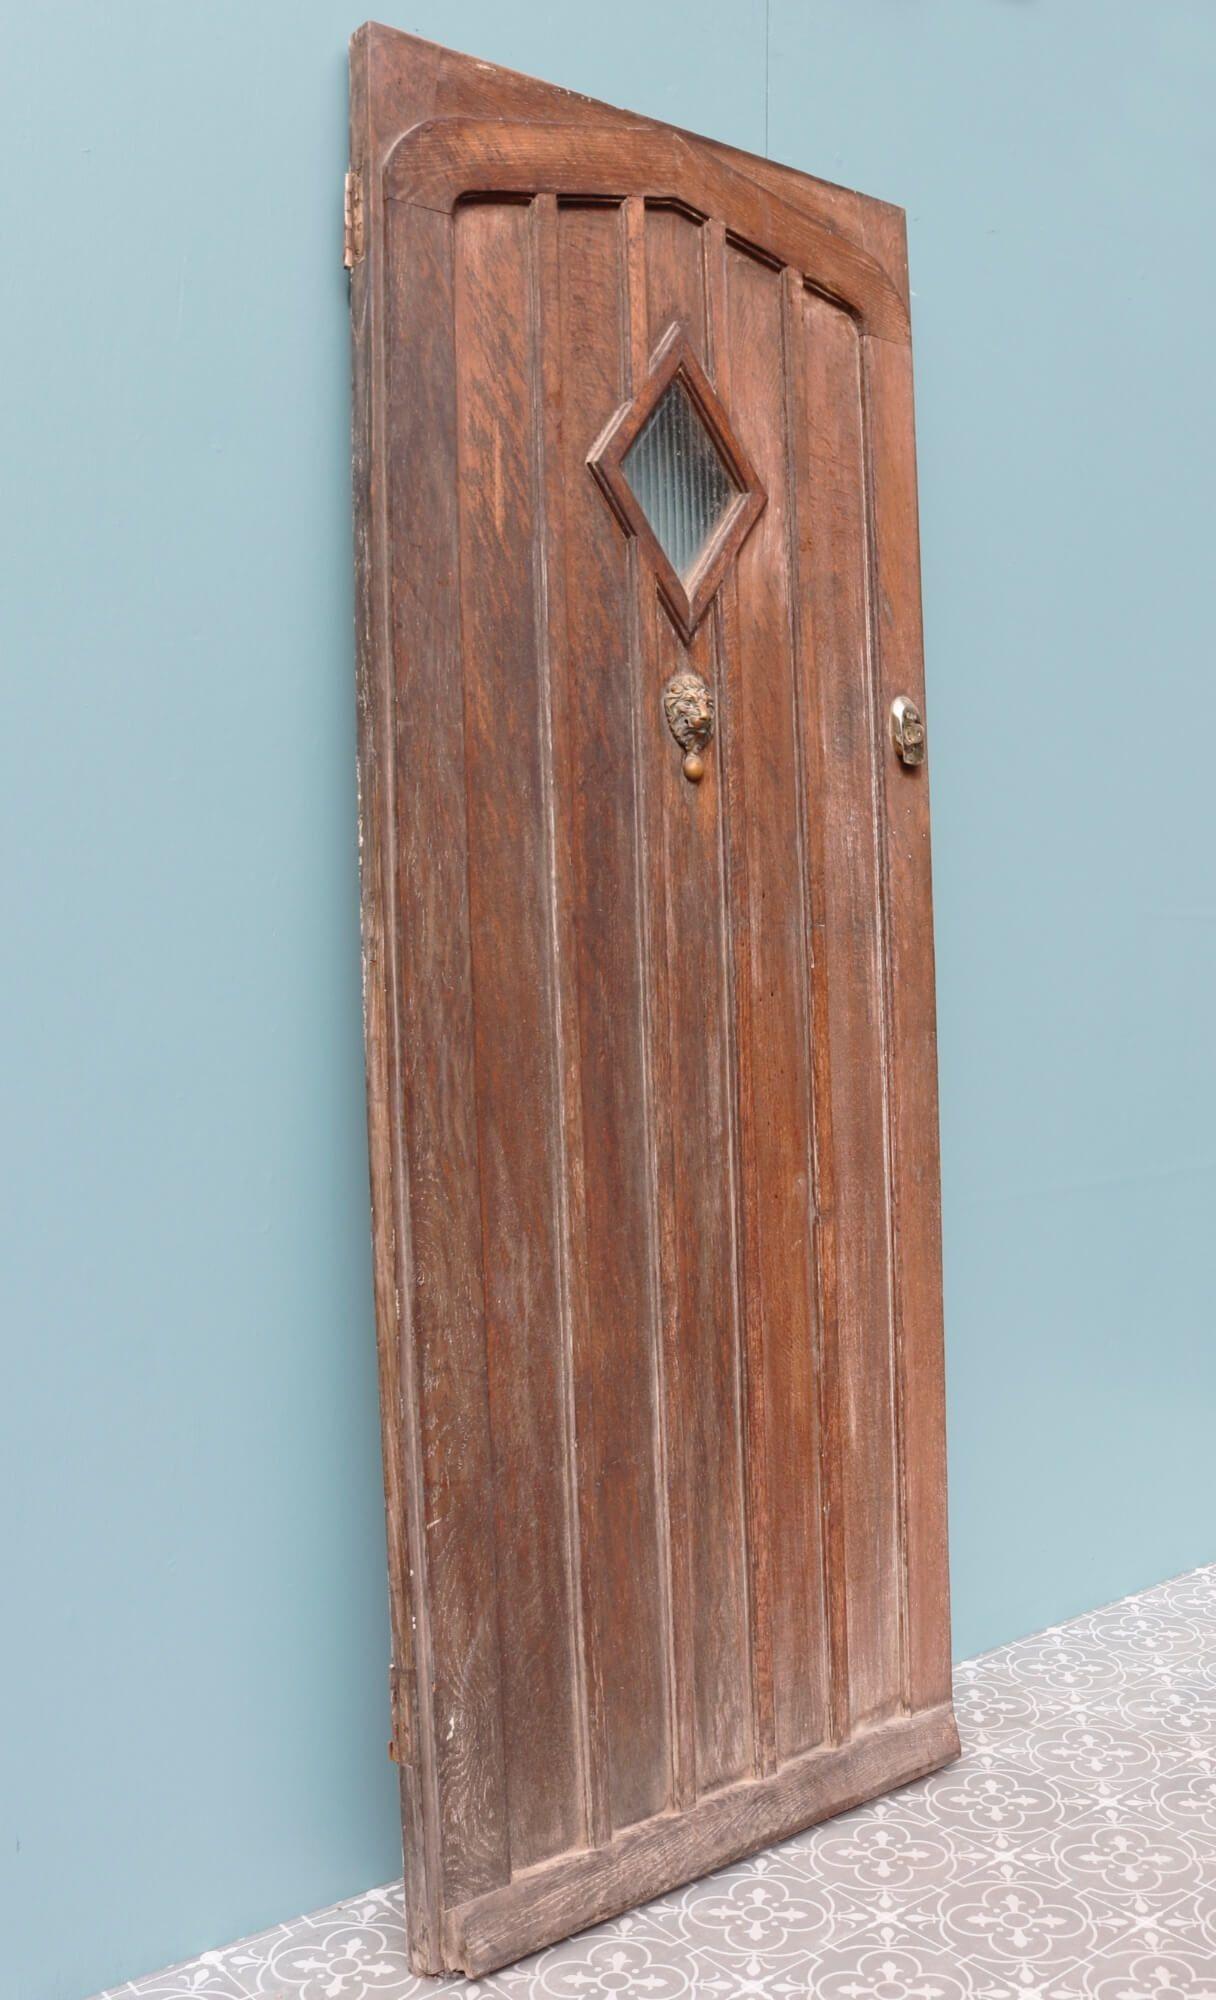 Made in the 1920s, this antique oak front door is a handsome entrance to a period cottage. Reclaimed from a property in the heart of England, it is strong and sturdy and comes with a key. It is an original 1920s front door made from vertical oak